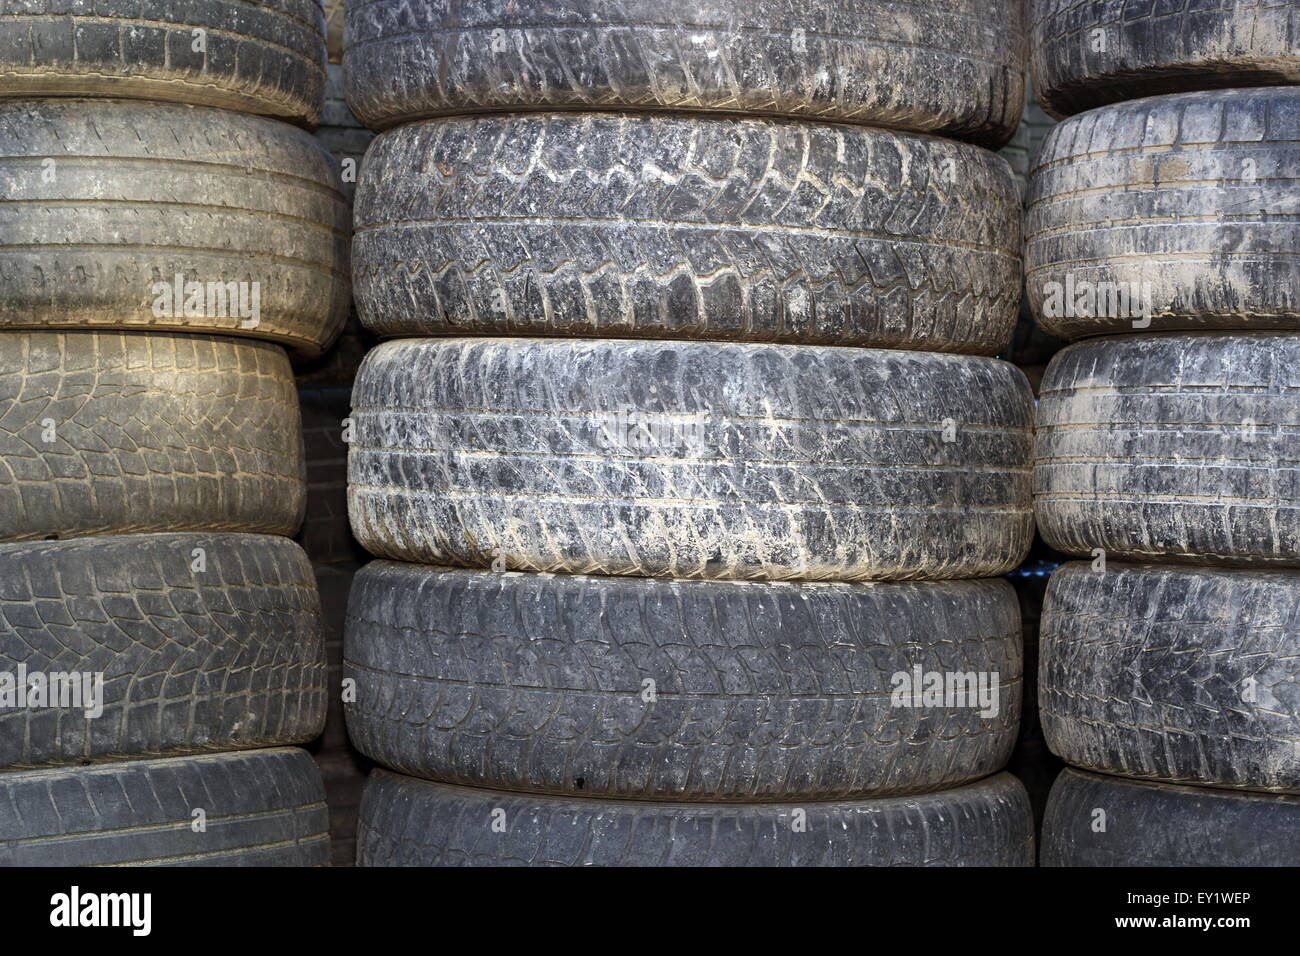 bunch of old used auto tires forming an interesting pattern Stock Photo